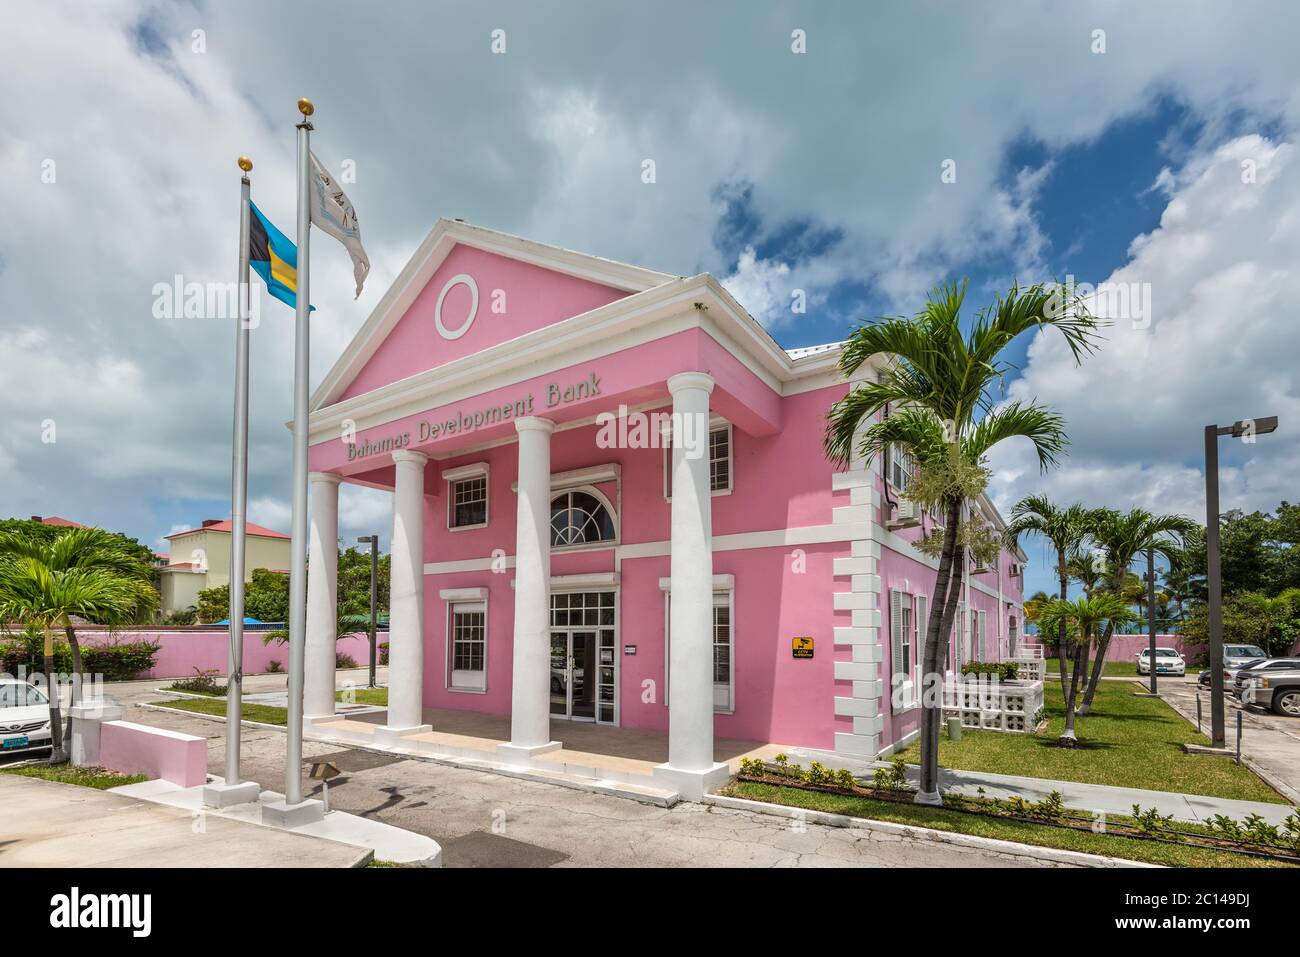 Nassau, Bahamas - May 3, 2019: Pink building of Bahamas Development Bank in Nassau. The Bahamas Development Bank, a wholly owned government institutio Stock Photo